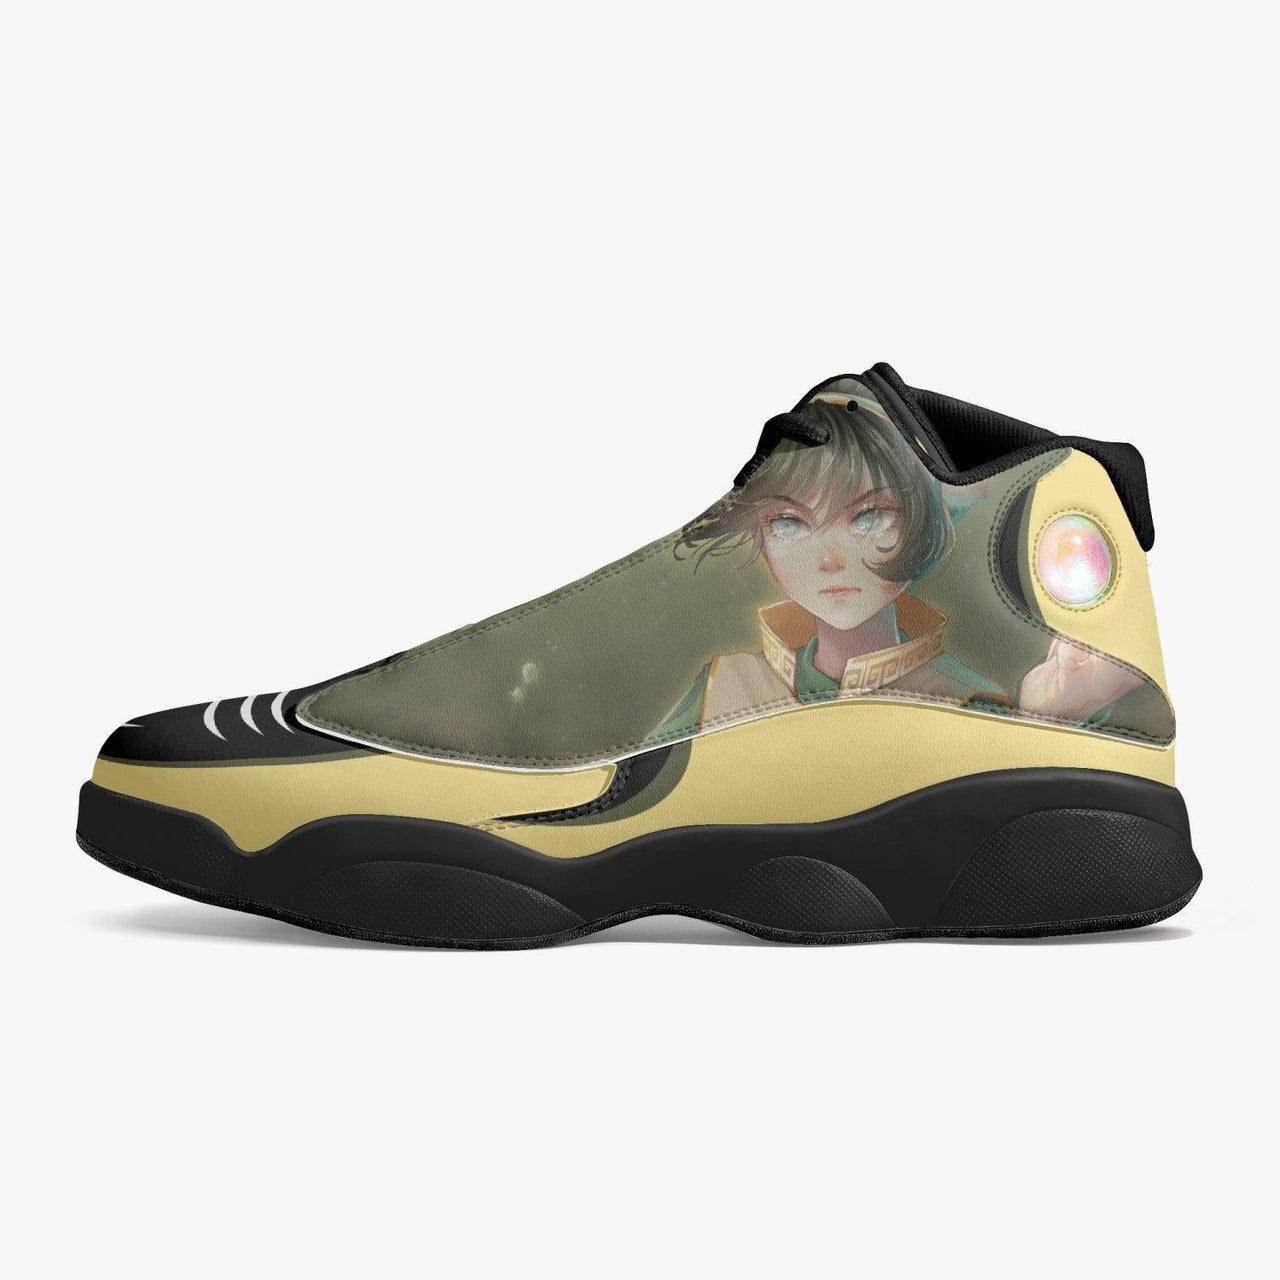 Avatar The Last Airbender Toph Beifong JD13 Anime Shoes _ Avatar The Last Airbender _ Ayuko